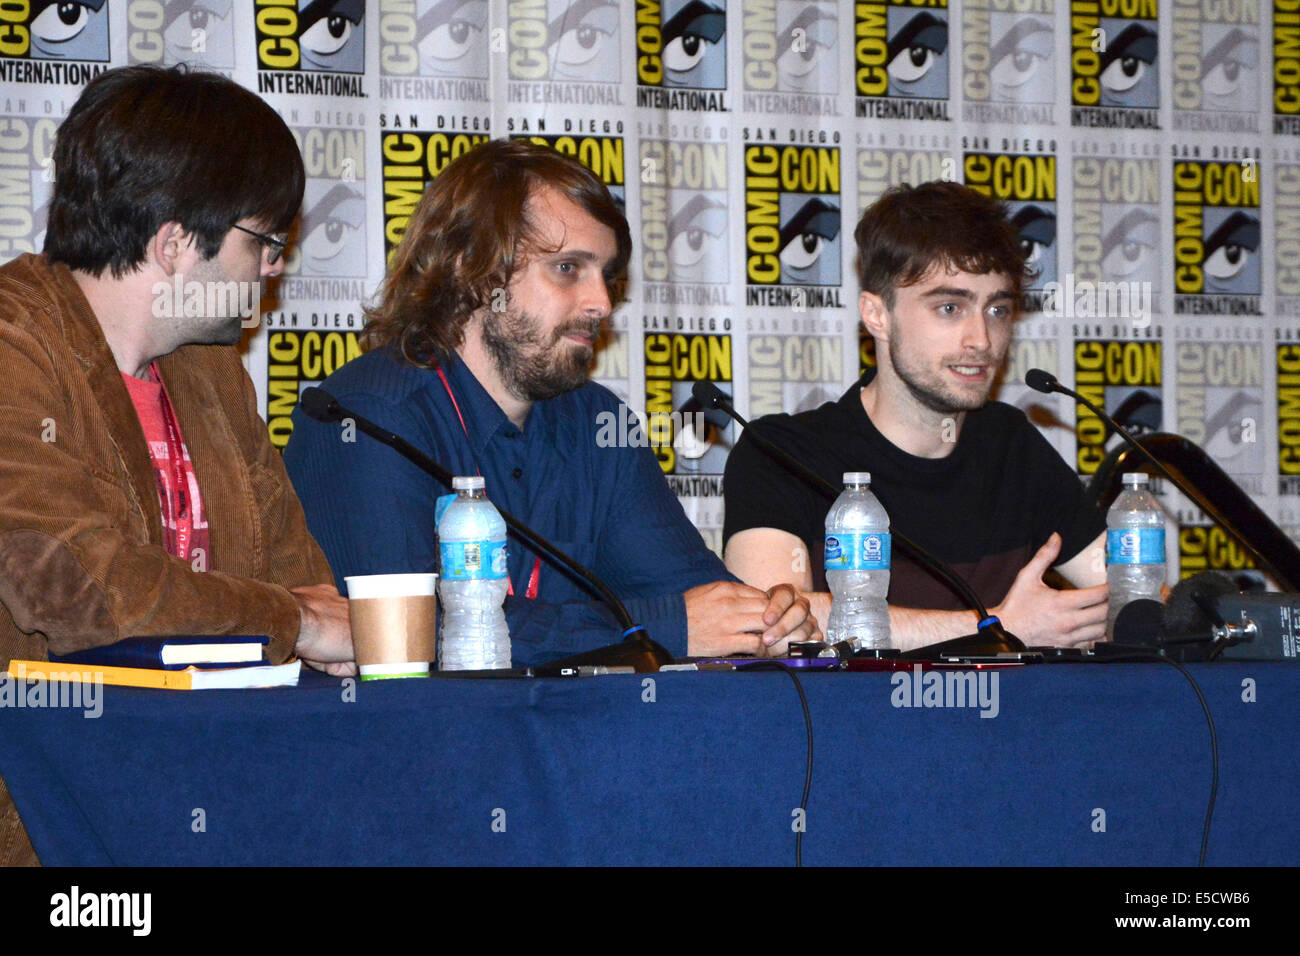 Joe Hill, Alexandre Aja and Daniel Radcliffe attend a panel of the movie 'Horns' at the San Diego Comic-Con International held at the San Diego Convention Center on July 25, 2014 in San Diego. Stock Photo